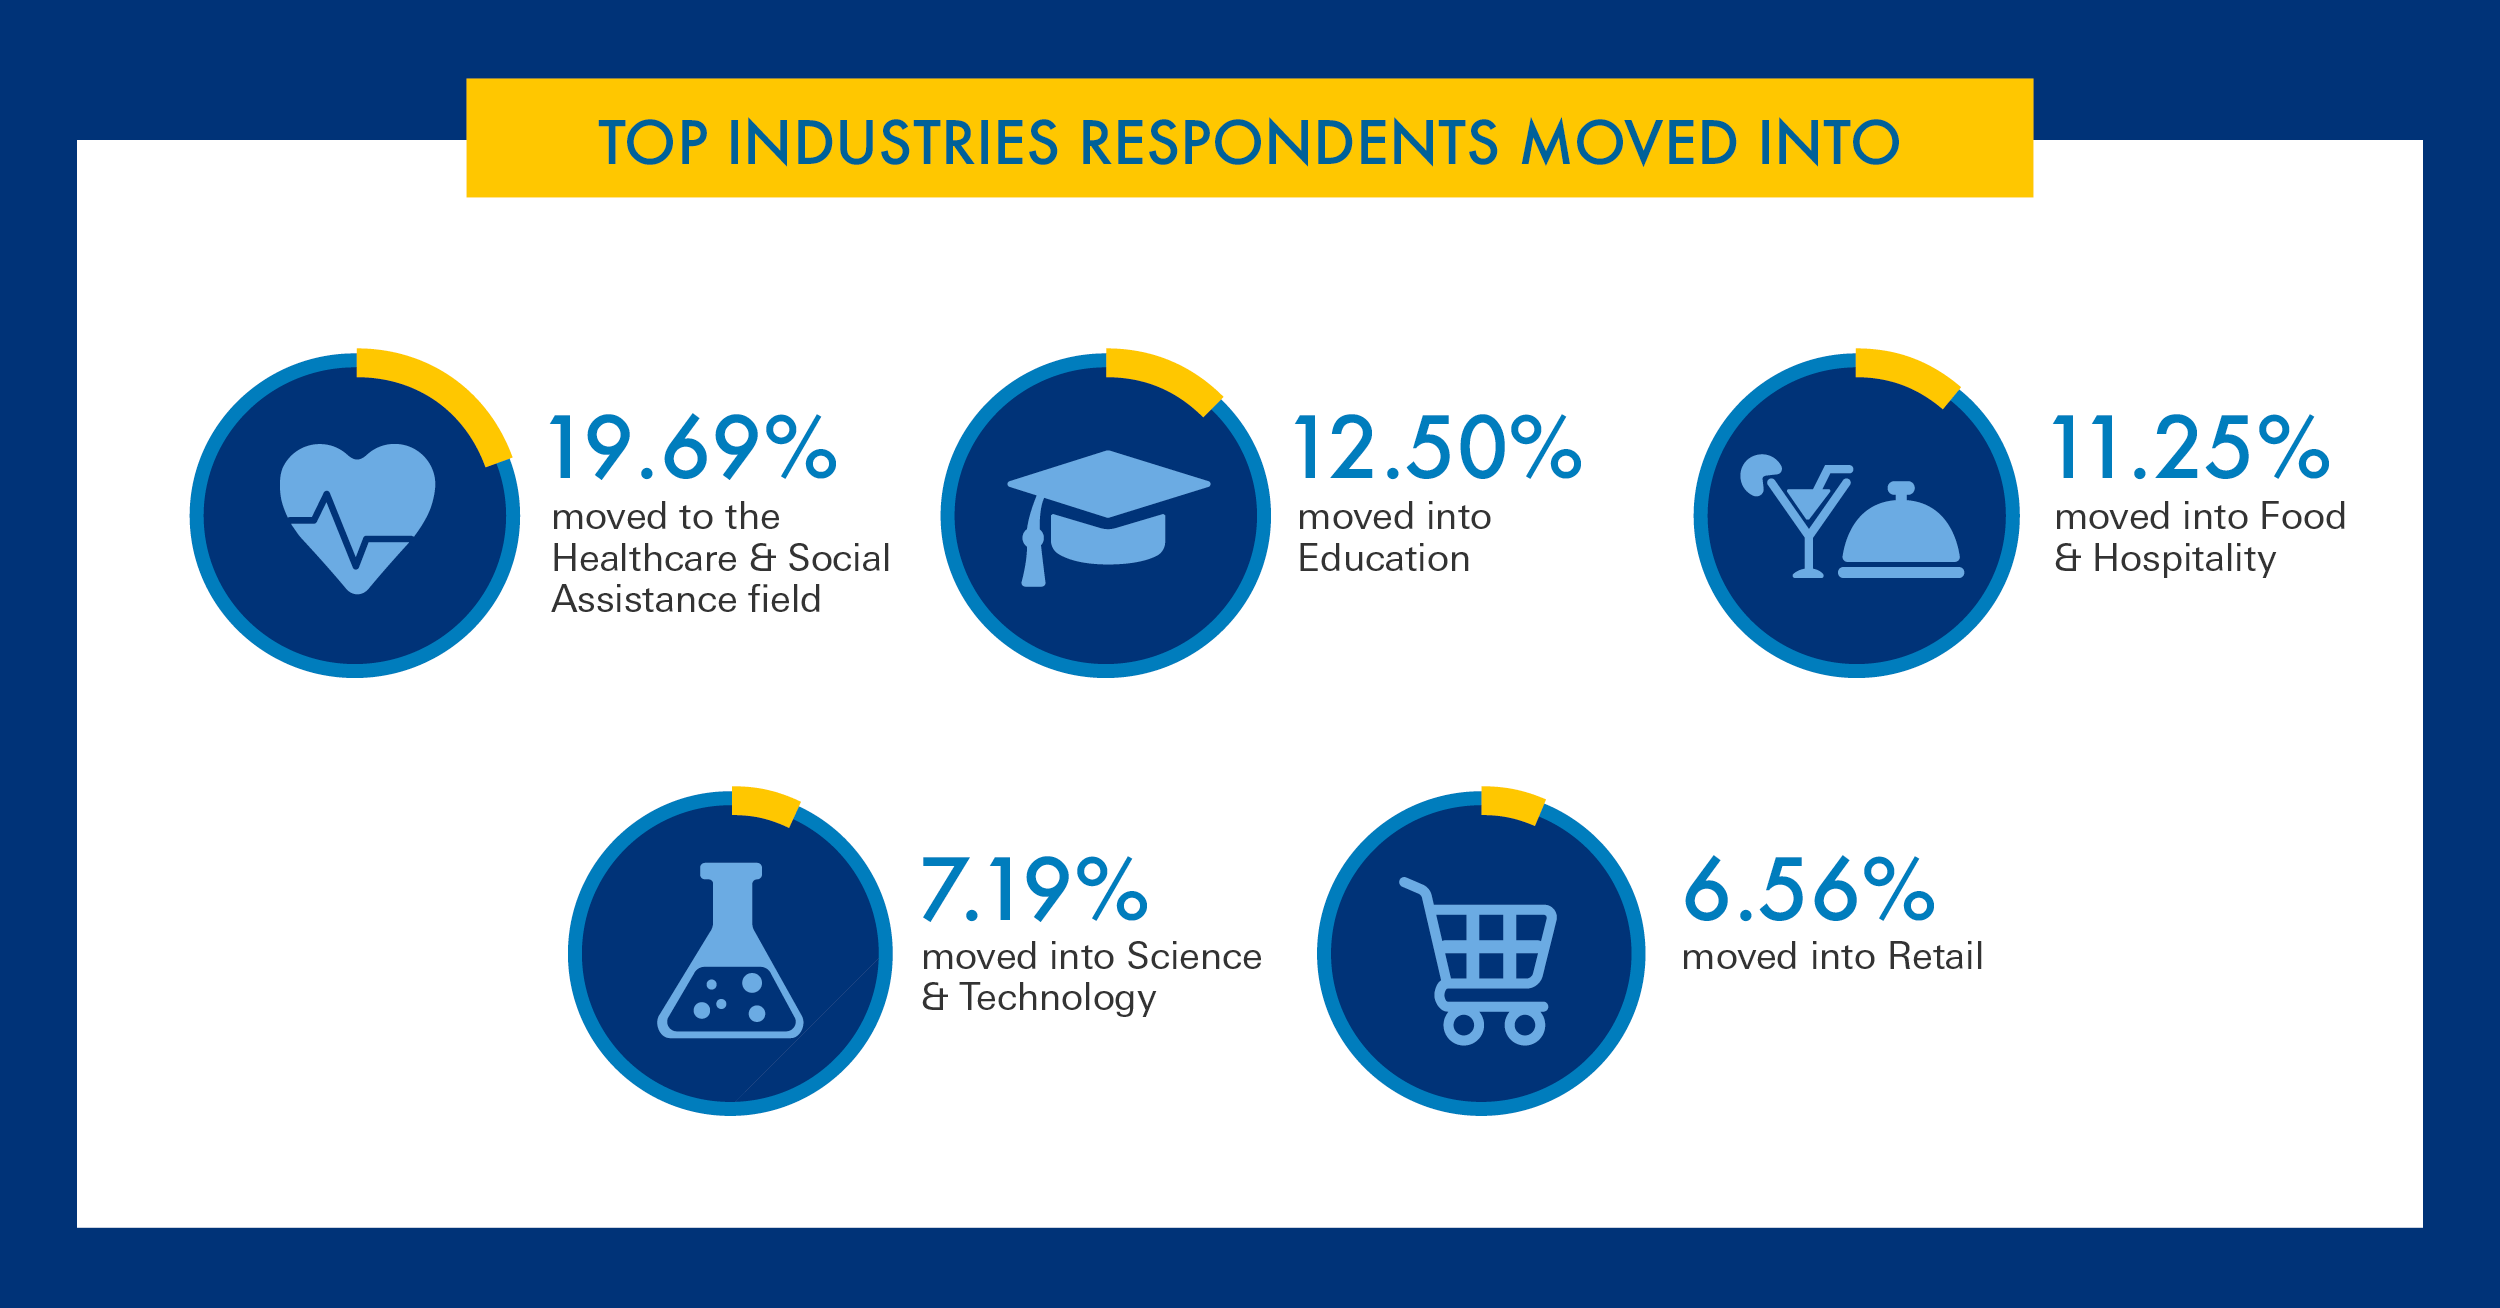 Top industries respondents moved into